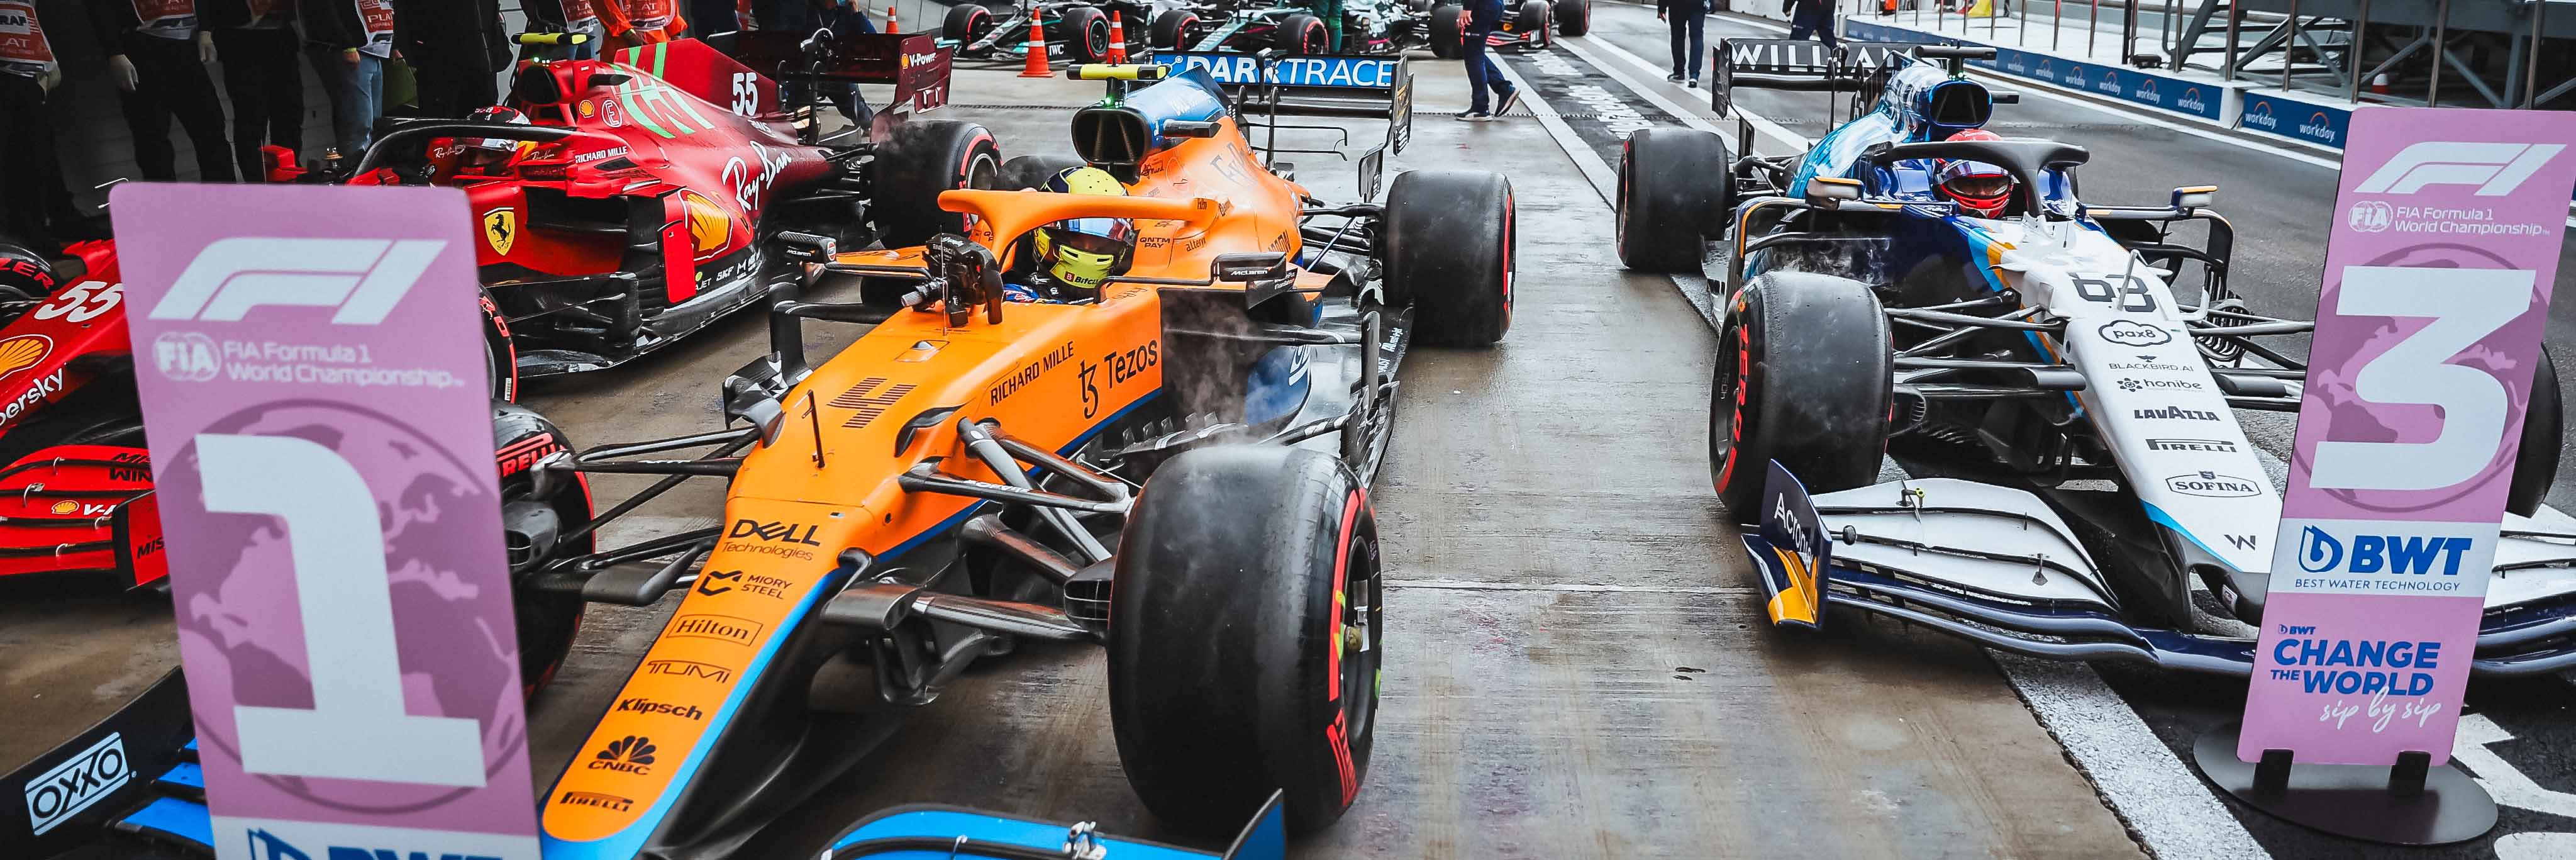 Lando Norris' McLaren after qualifying on pole for the 2021 Russian Grand Prix